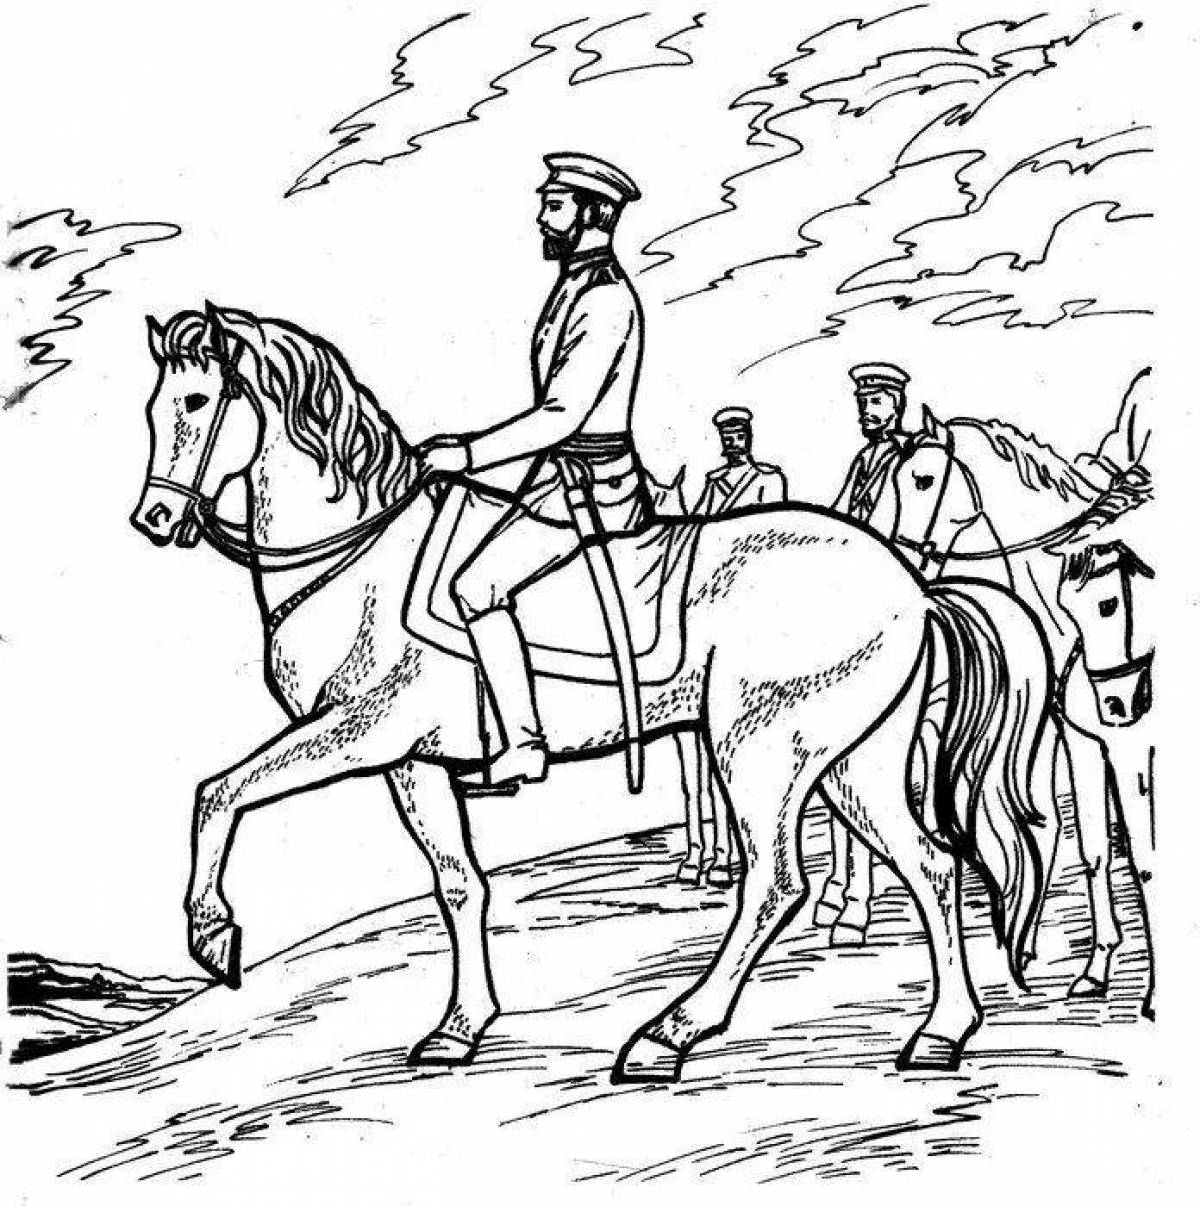 Coloring page charming Don Cossacks